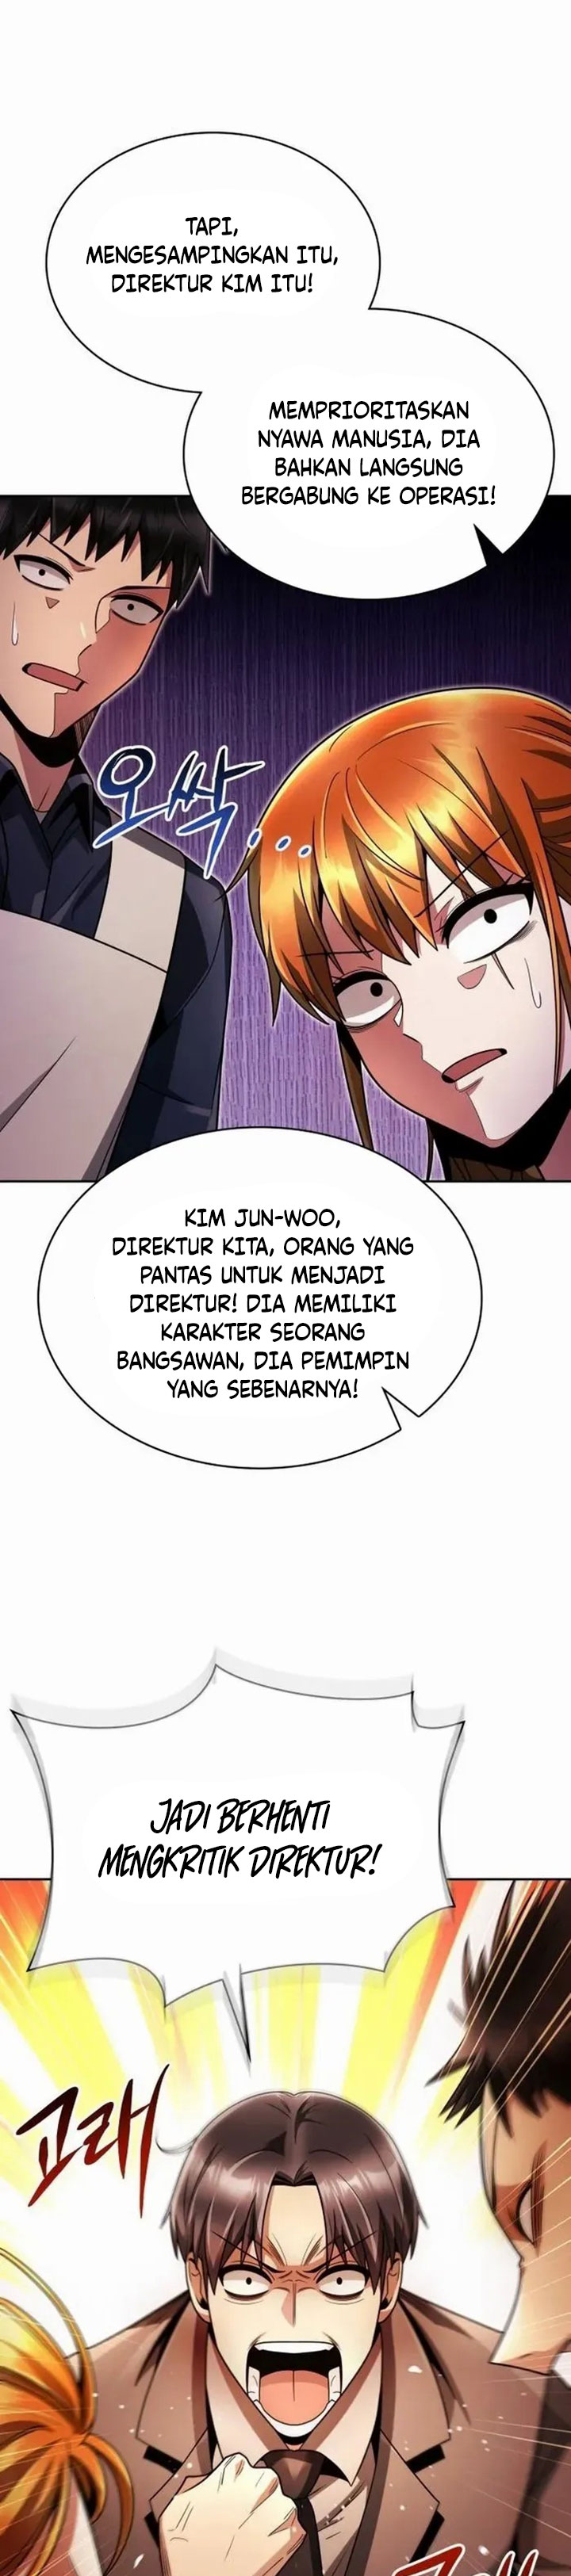 Dilarang COPAS - situs resmi www.mangacanblog.com - Komik clever cleaning life of the returned genius hunter 049 - chapter 49 50 Indonesia clever cleaning life of the returned genius hunter 049 - chapter 49 Terbaru 7|Baca Manga Komik Indonesia|Mangacan